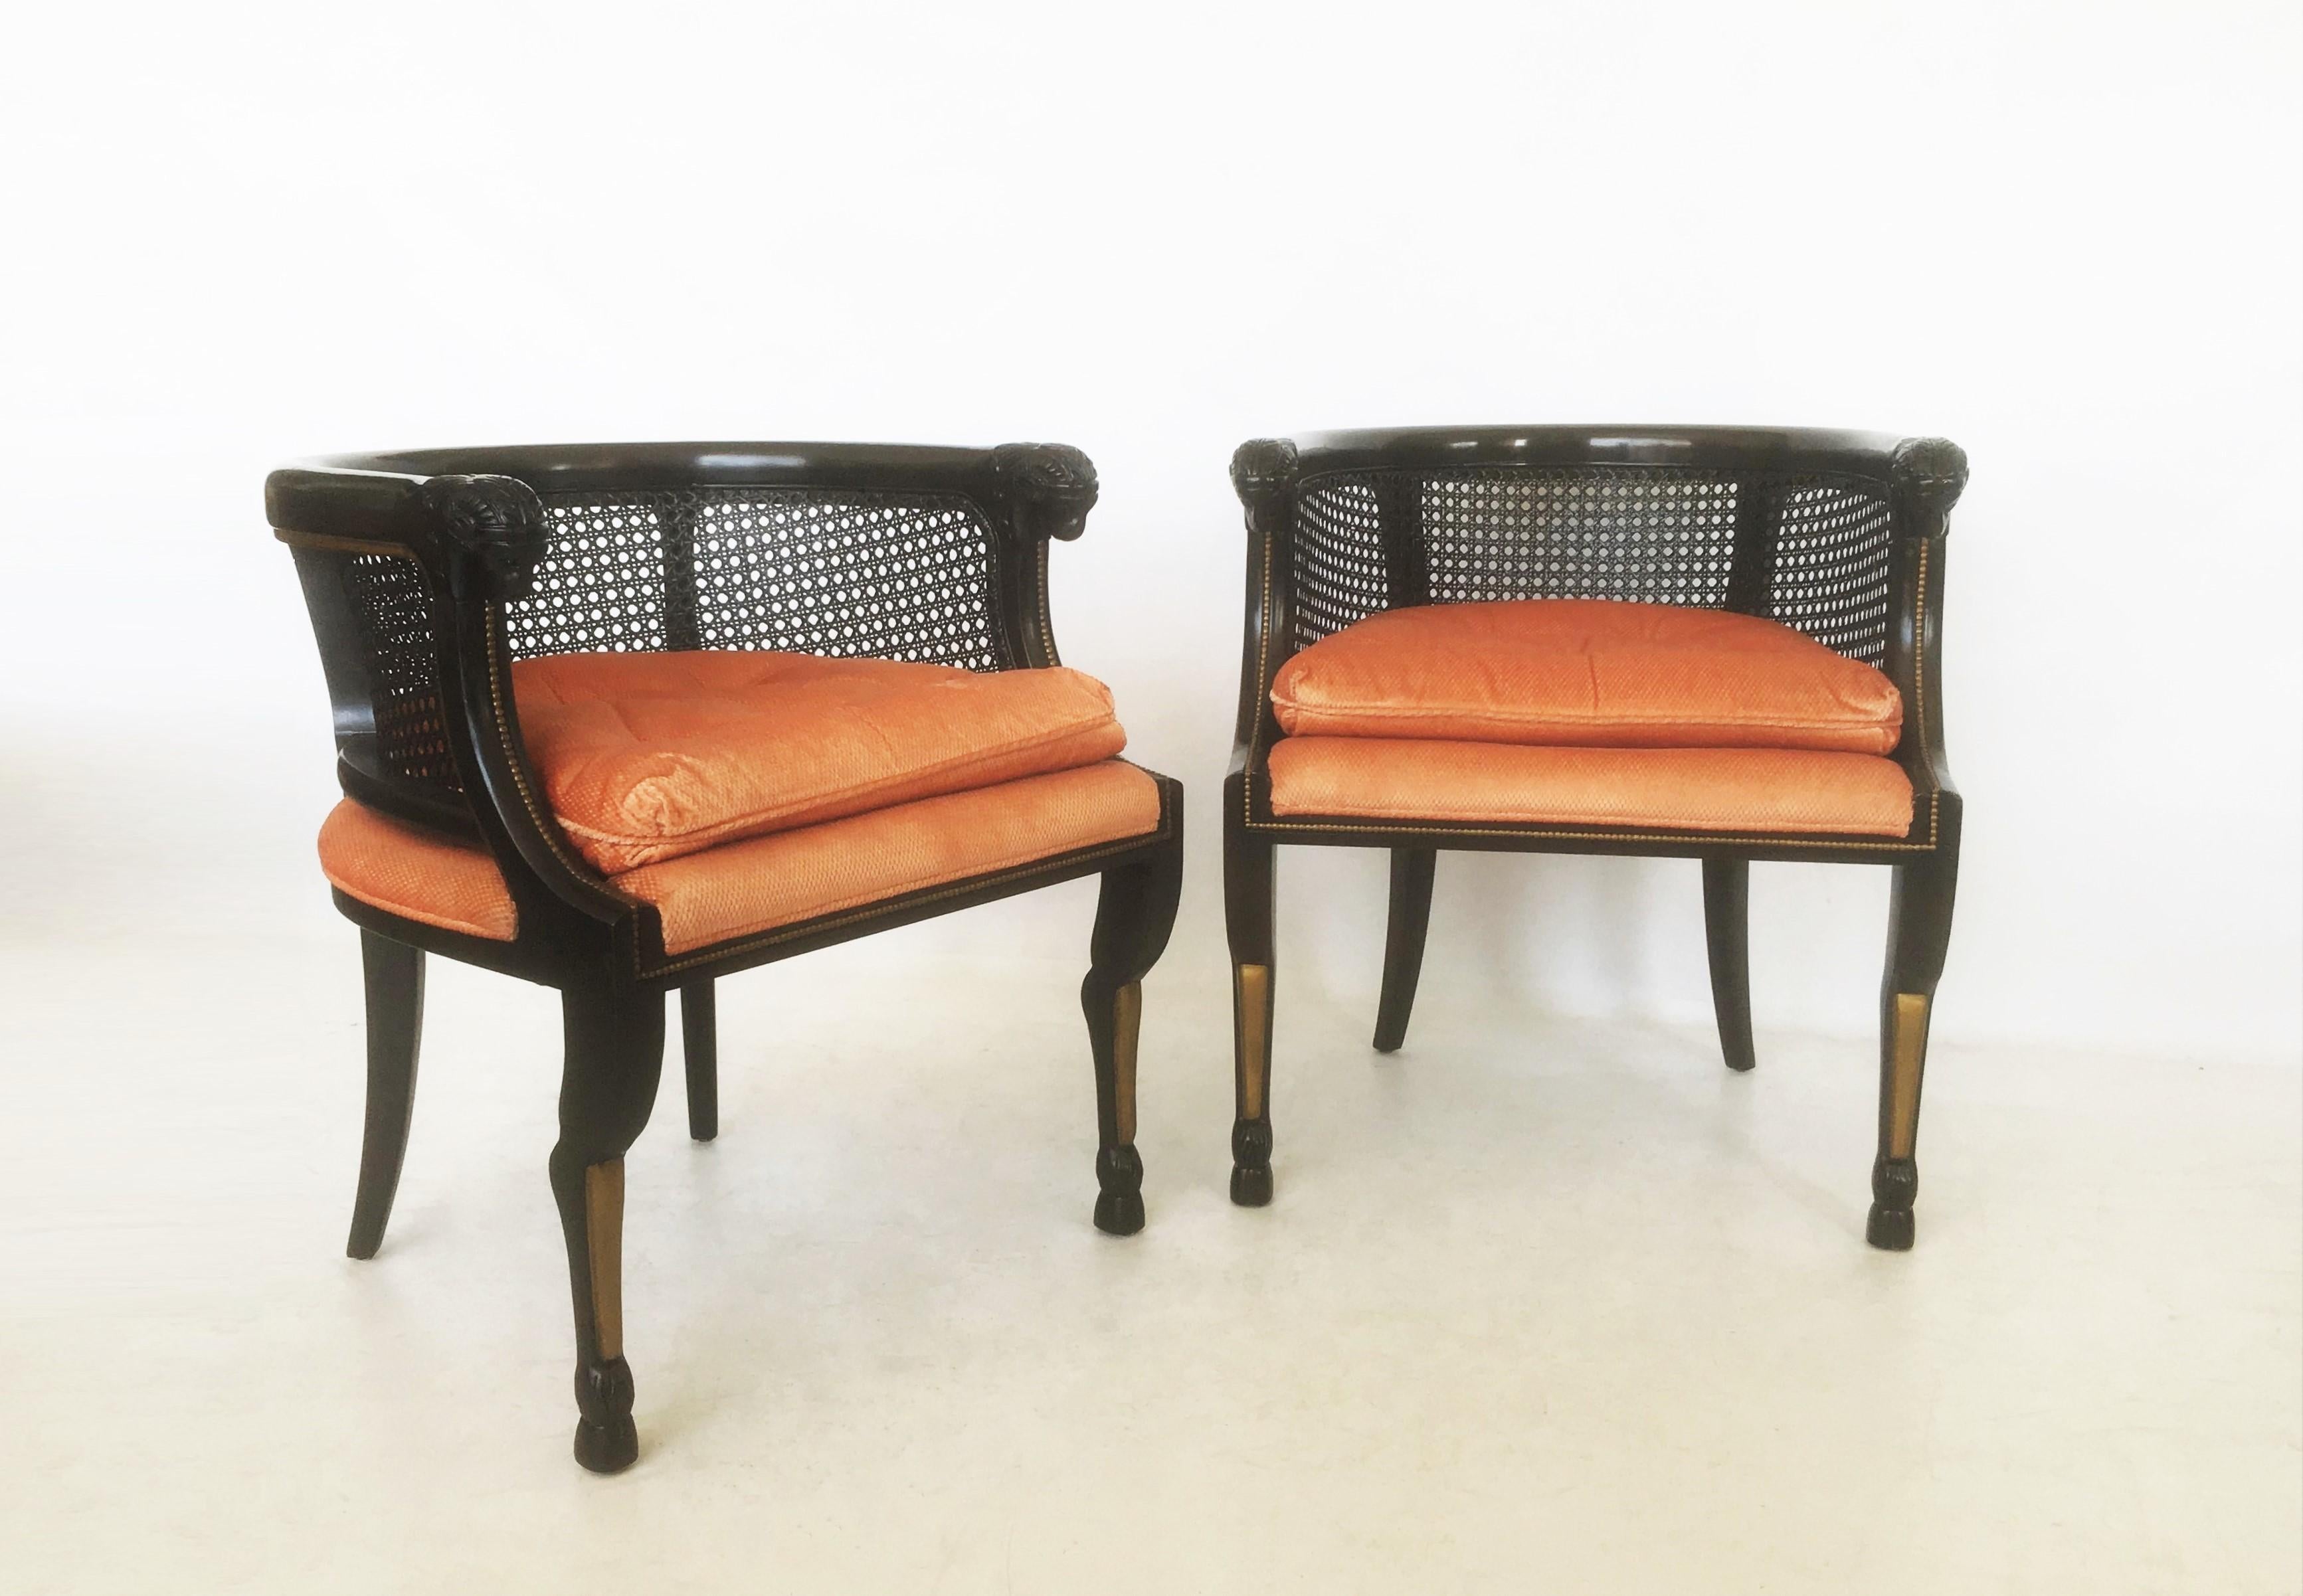 Tailored stately pair of ebonized bergères. These armchairs feature a caned barrel back including a rounded edge over a coral colored cushioned seat with finely carved ram's head hand holds. The gentle curve from the back along the arm is very